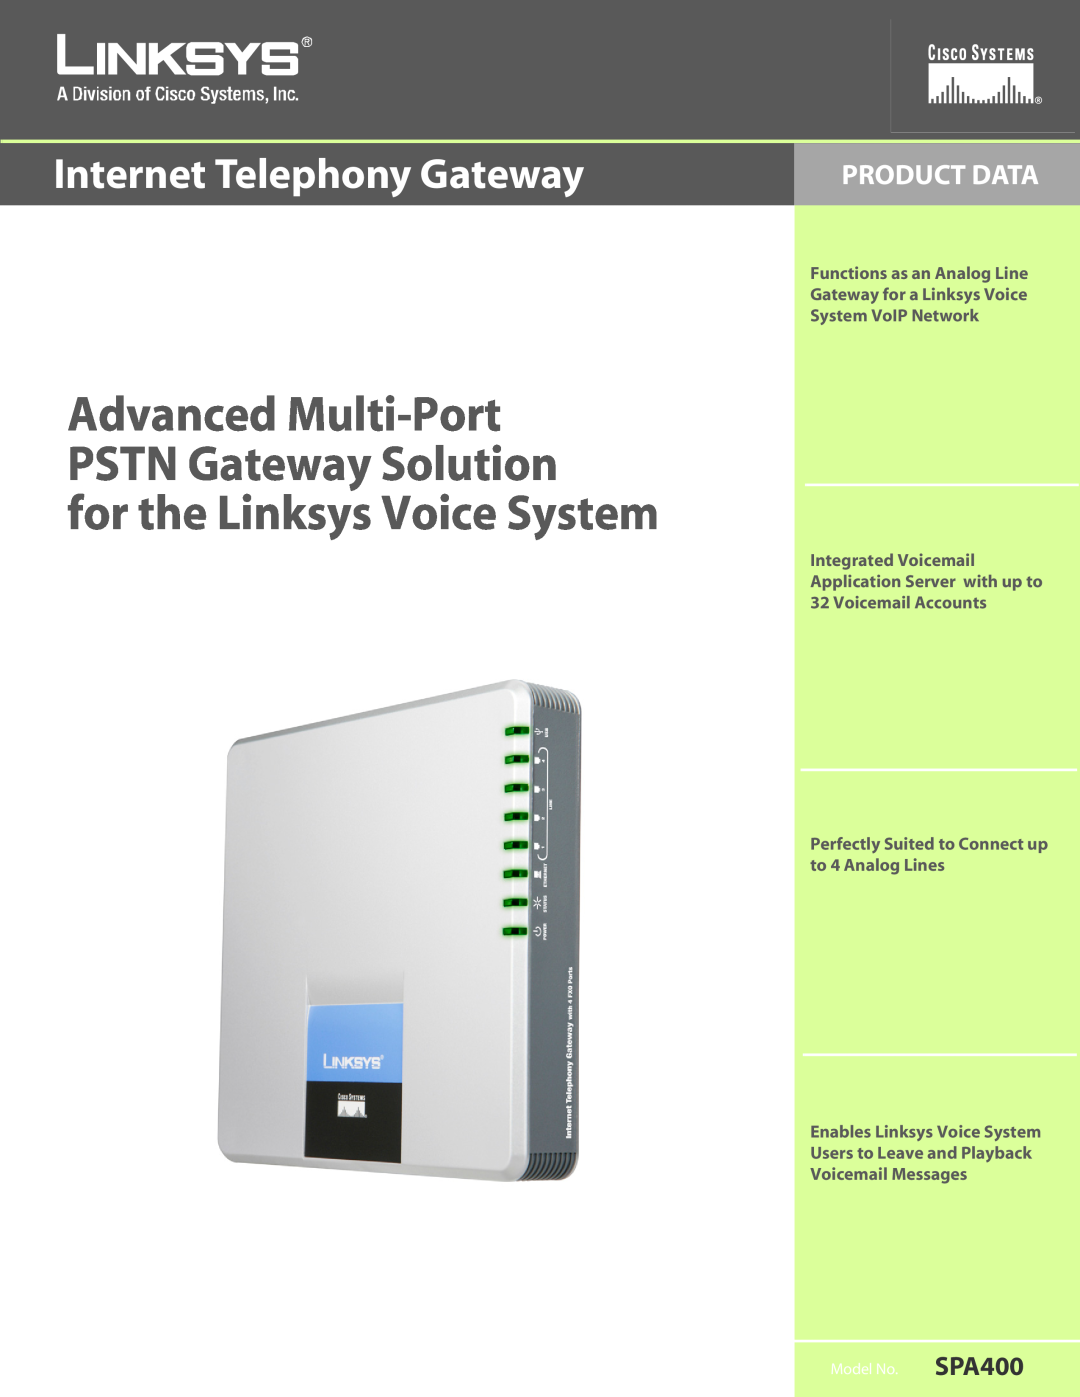 Cisco Systems 60606NC LH manual Product Data, Internet Telephony Gateway, Perfectly Suited to Connect up to 4 Analog Lines 